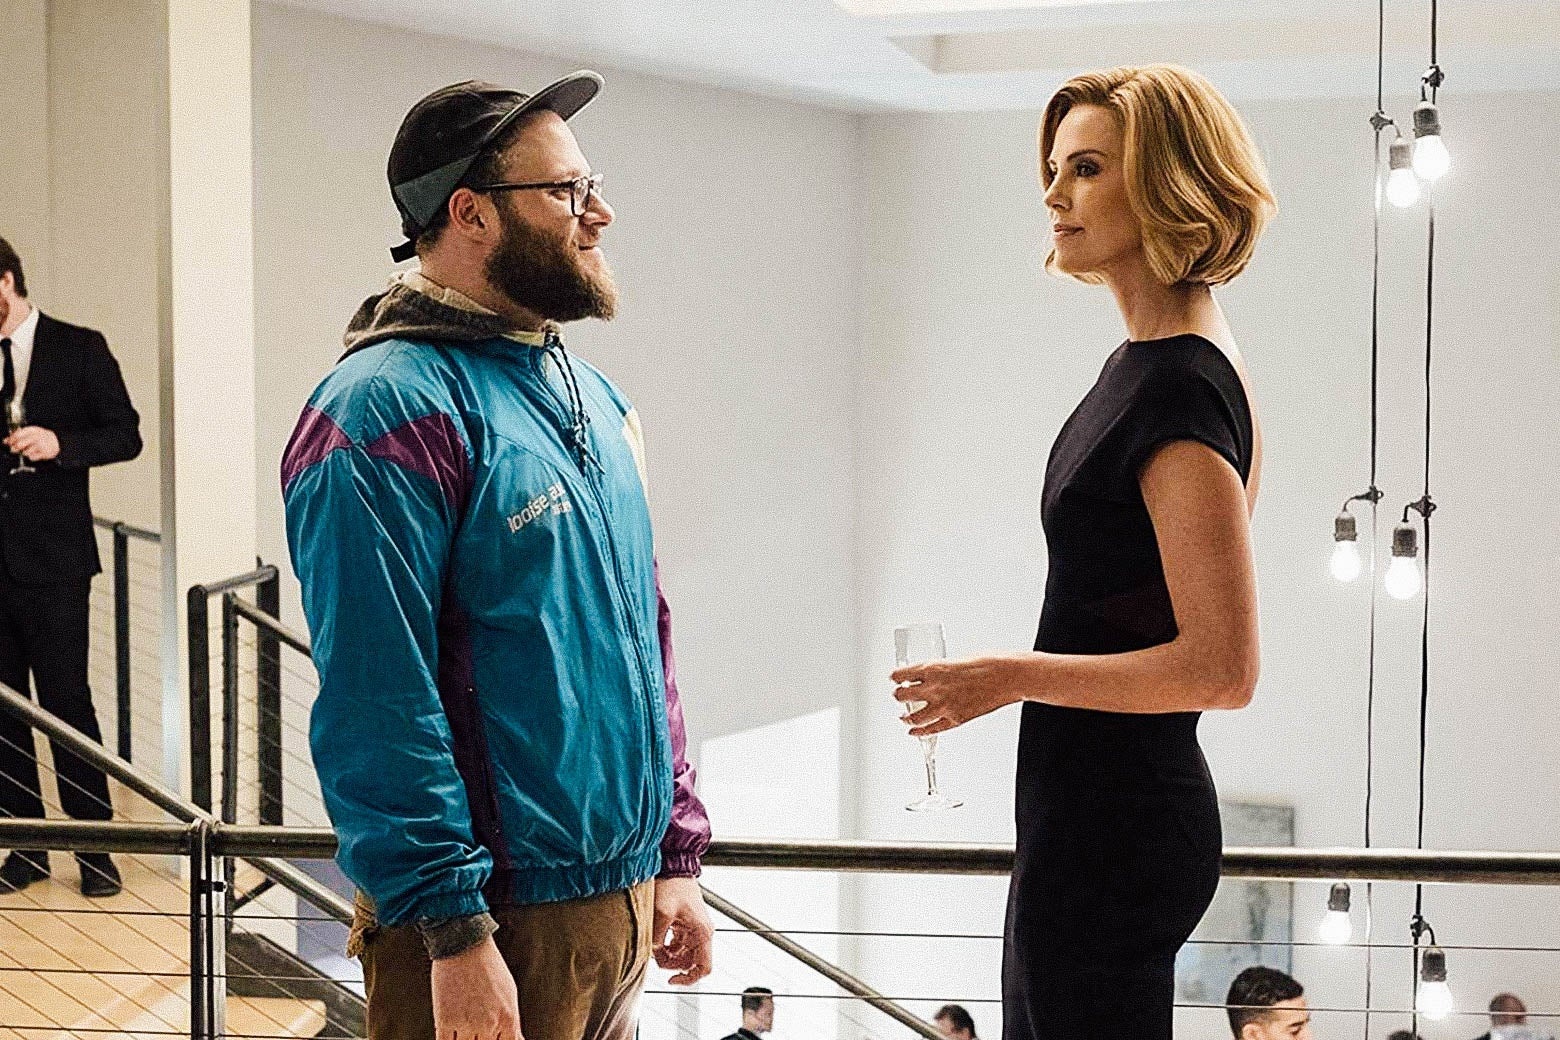 Seth Rogen wears a windbreaker and Charlize Theron wears a chic black dress as they talk at a party in a still from the movie.